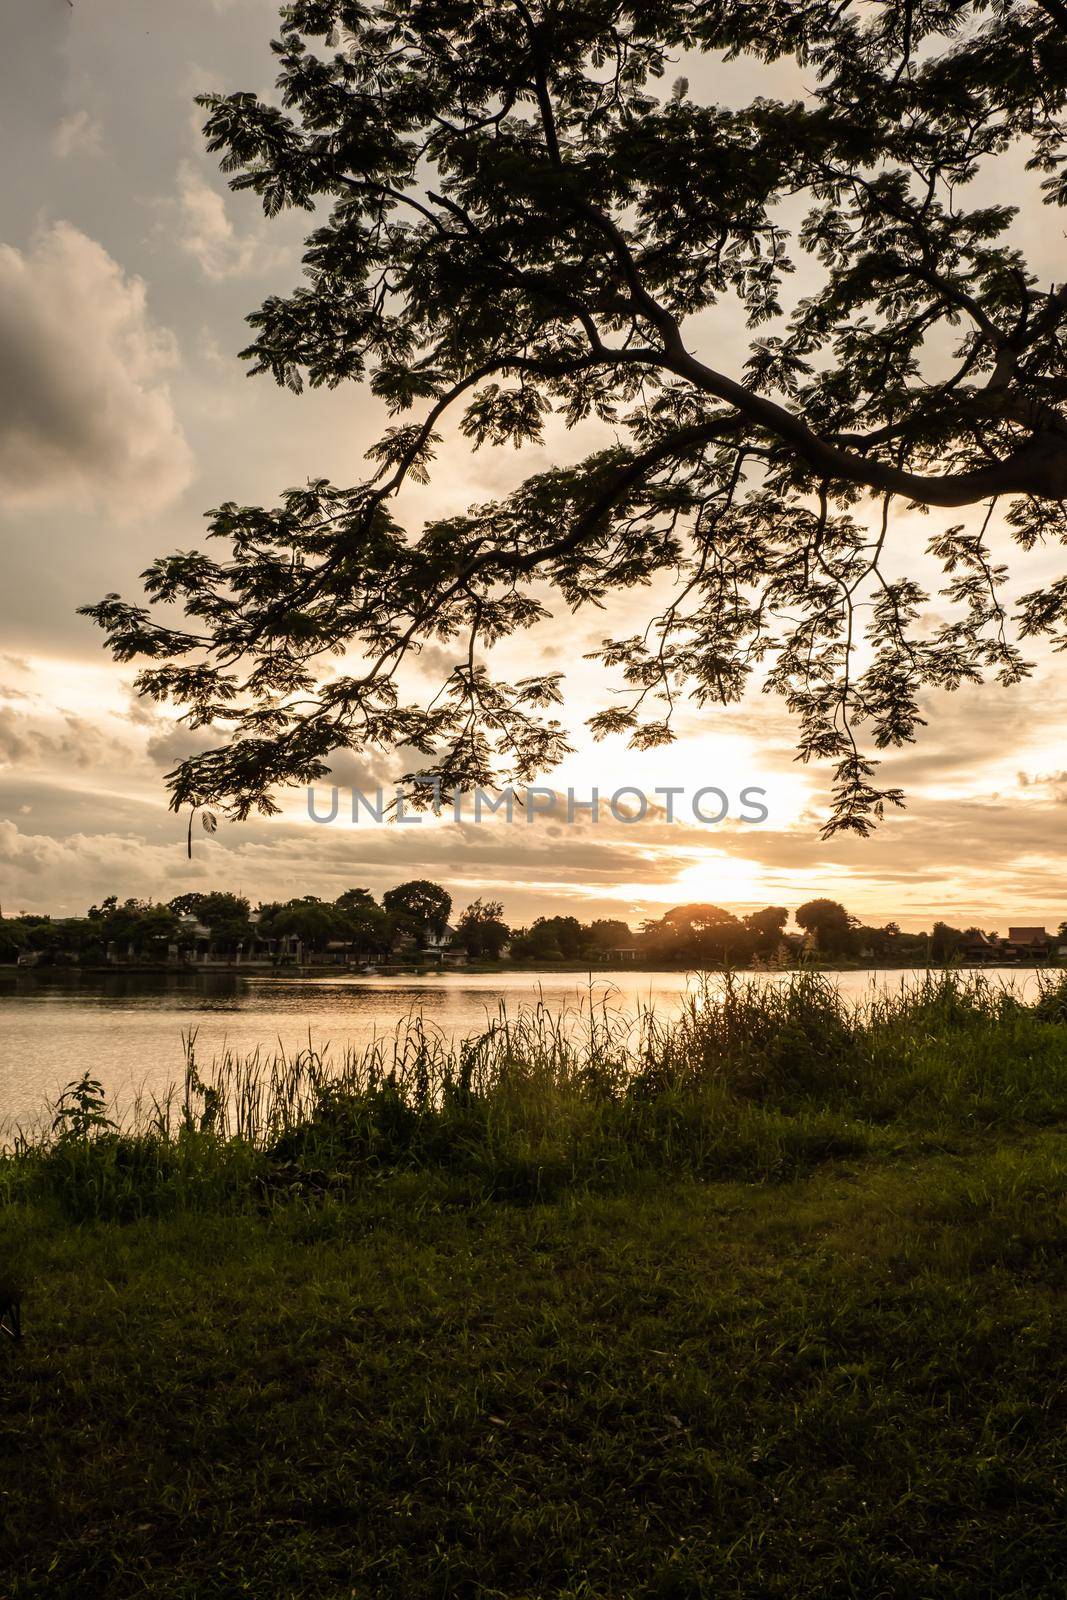 tree silhouette at sunset sky next nature river lake landscape nature background.